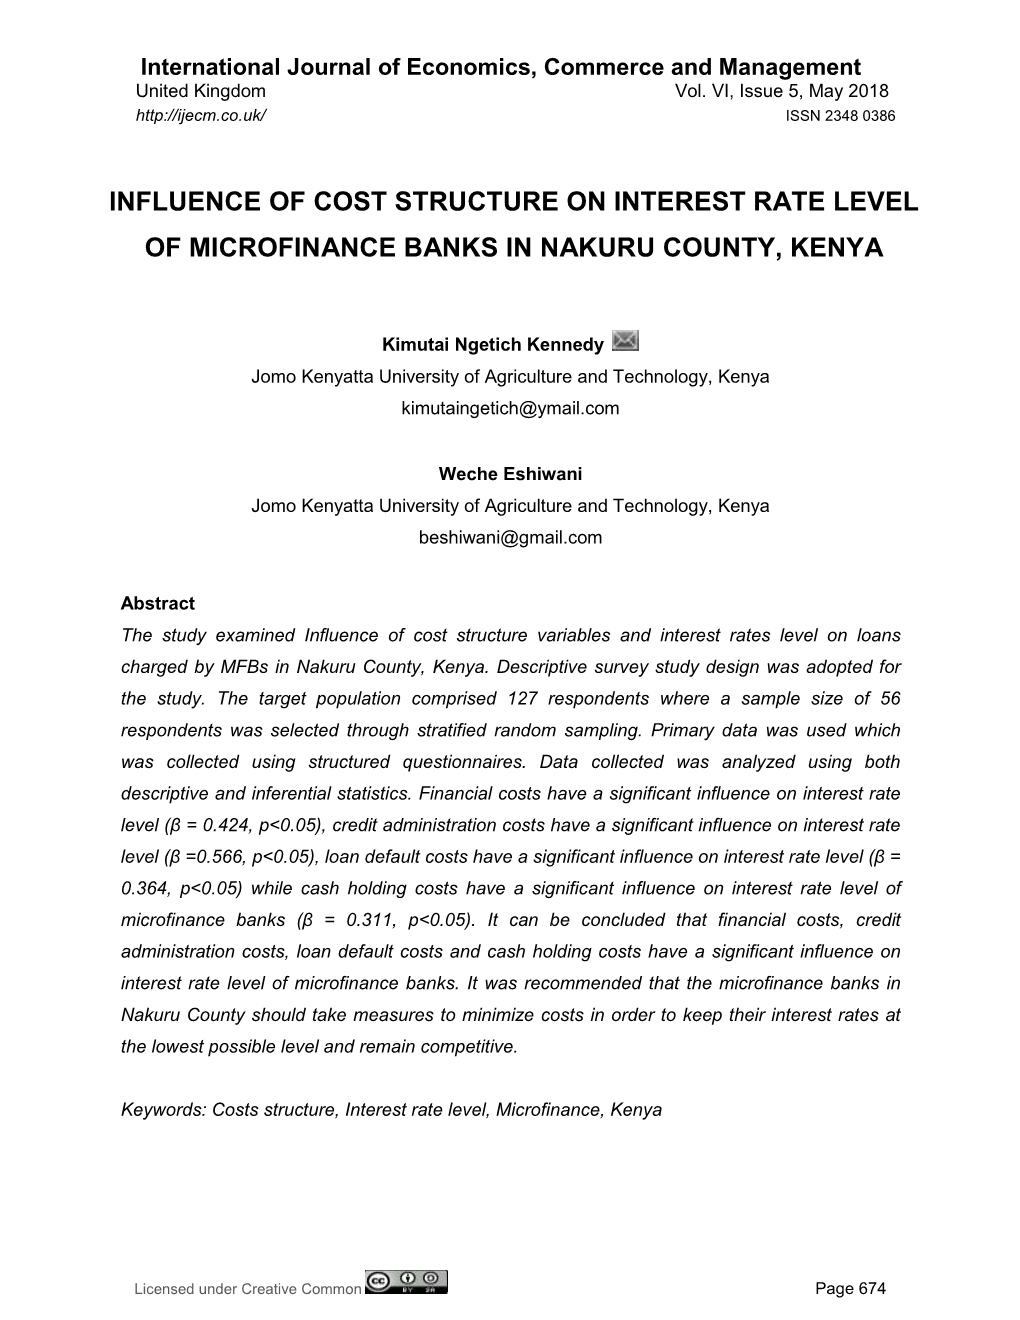 Influence of Cost Structure on Interest Rate Level of Microfinance Banks in Nakuru County, Kenya